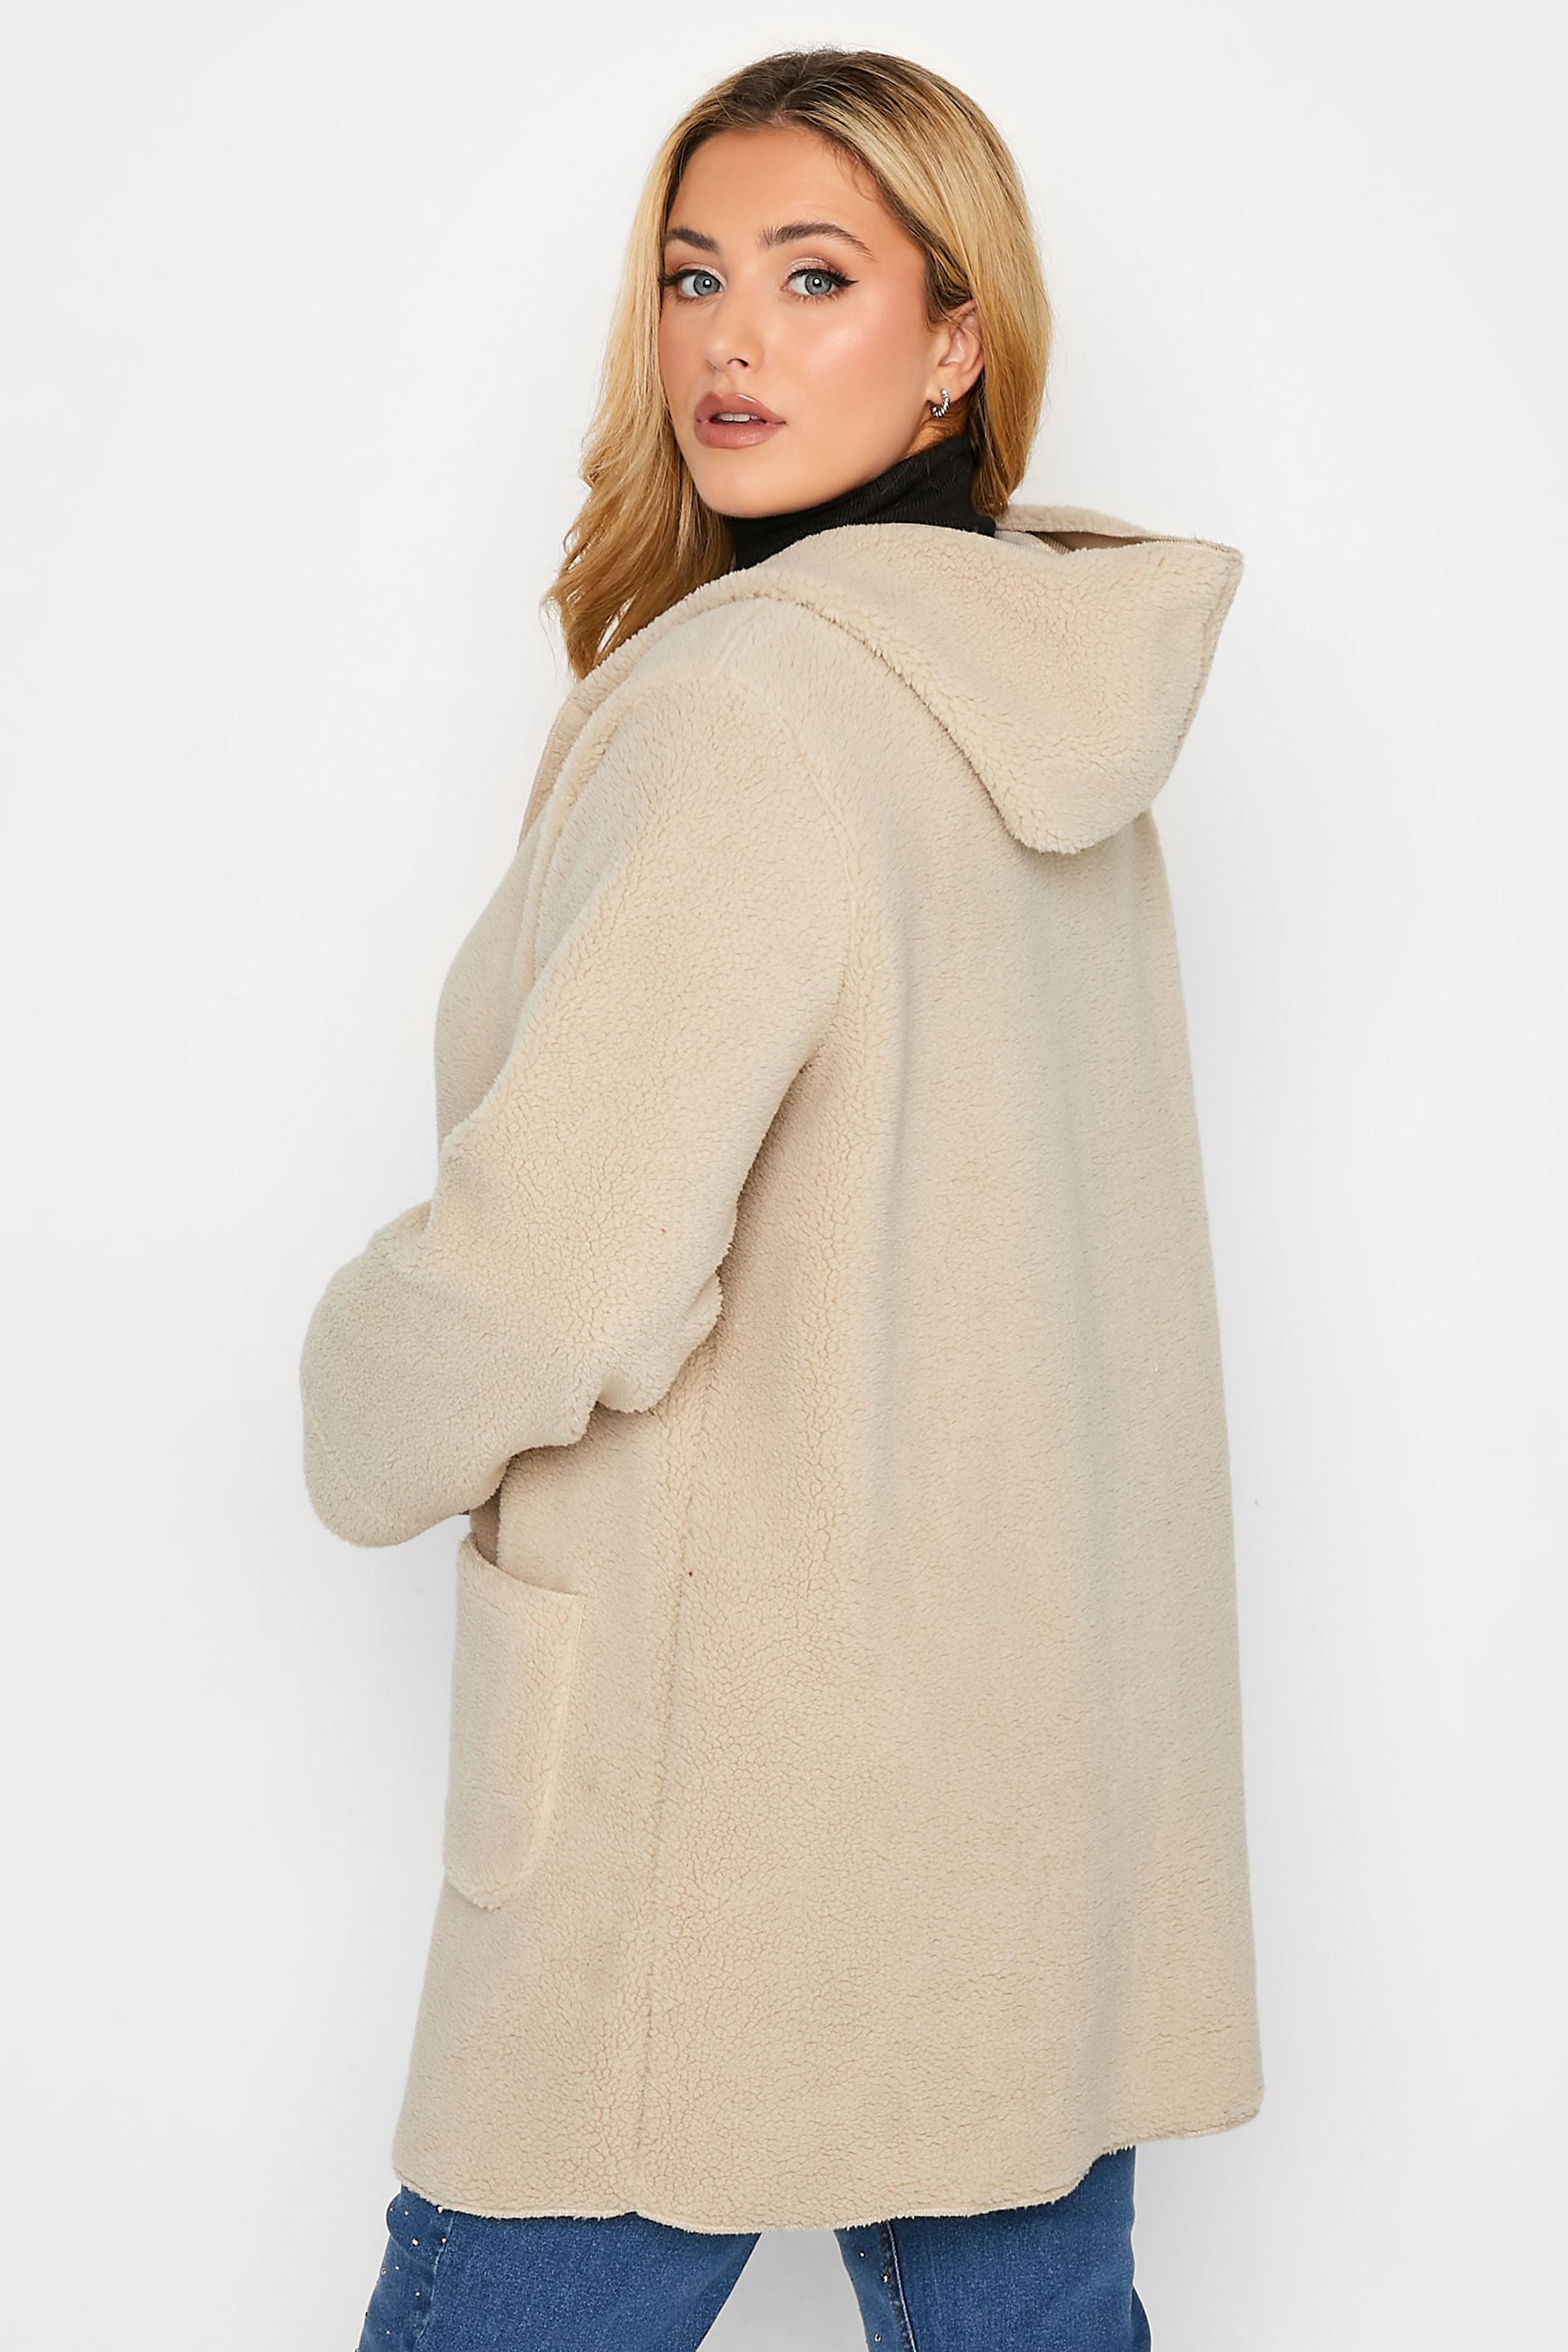 YOURS LUXURY Plus Size Beige Brown Teddy Hooded Jacket | Yours Clothing 3